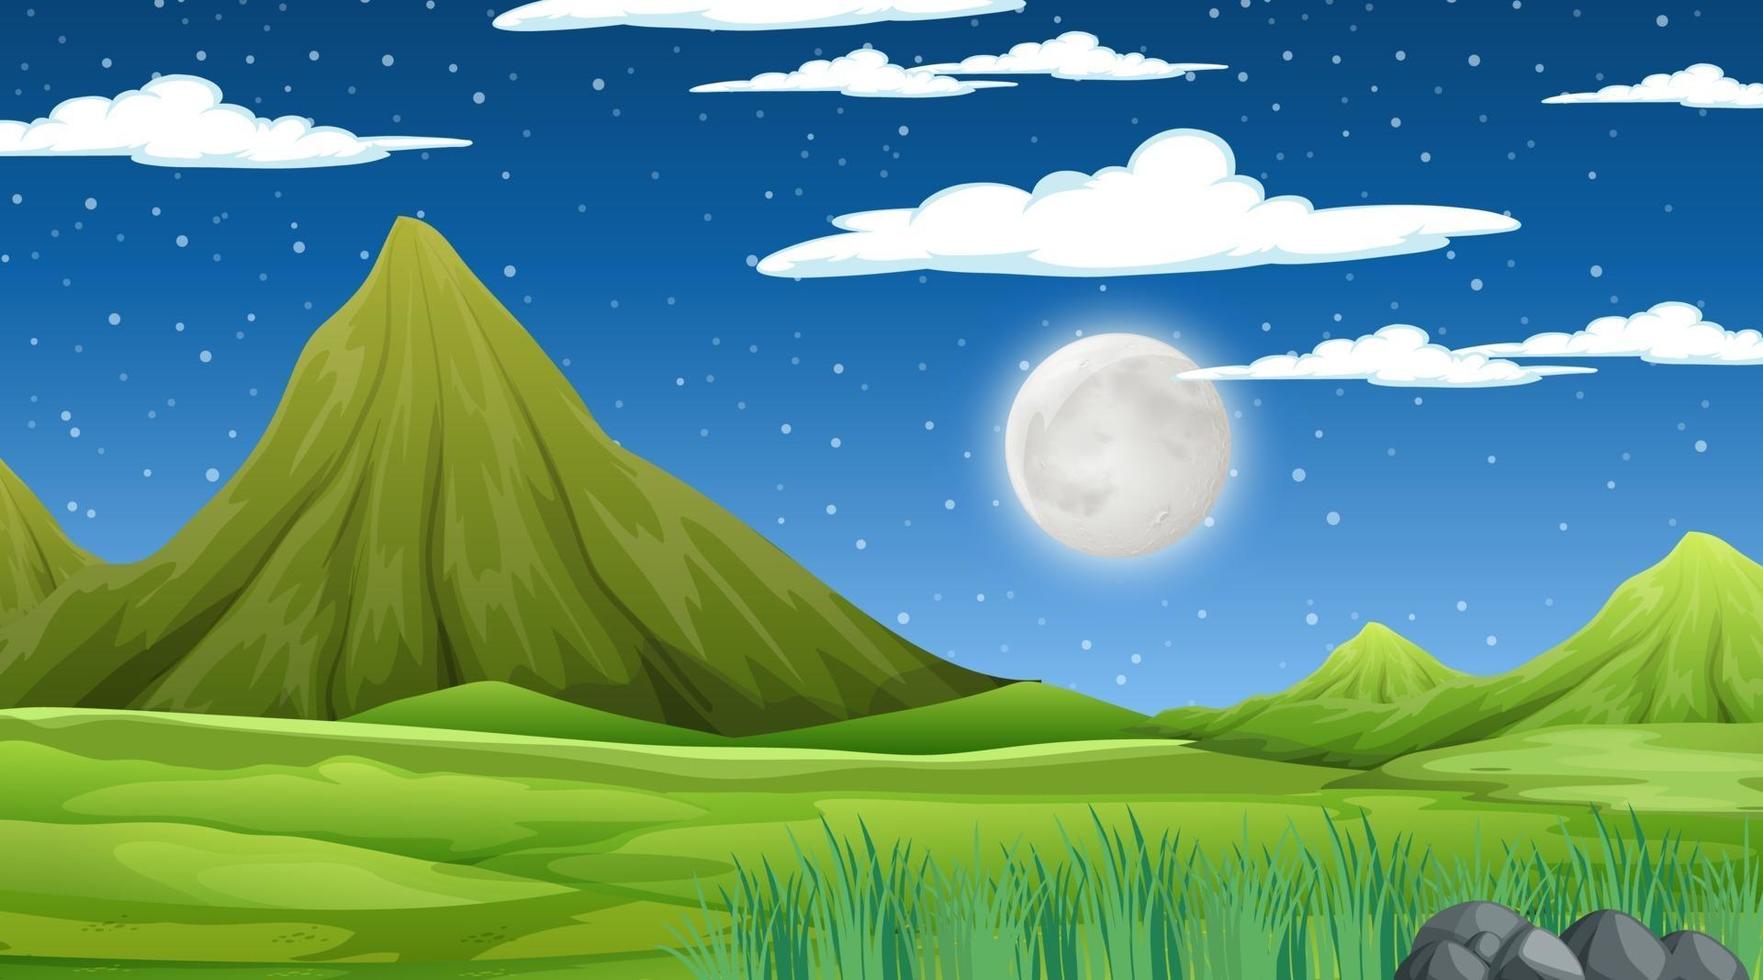 Blank meadow landscape with mountain scene at night vector